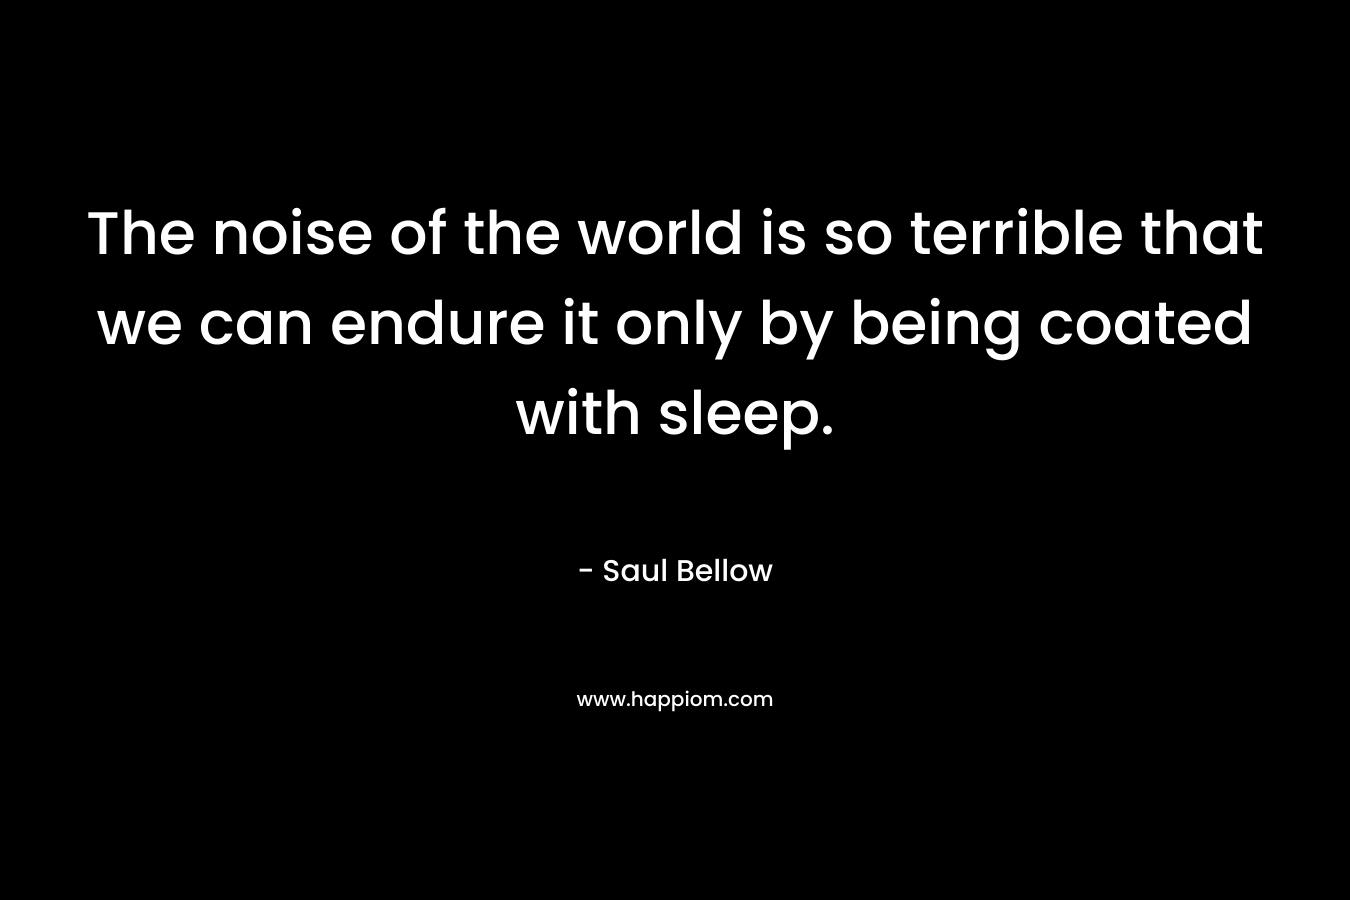 The noise of the world is so terrible that we can endure it only by being coated with sleep.